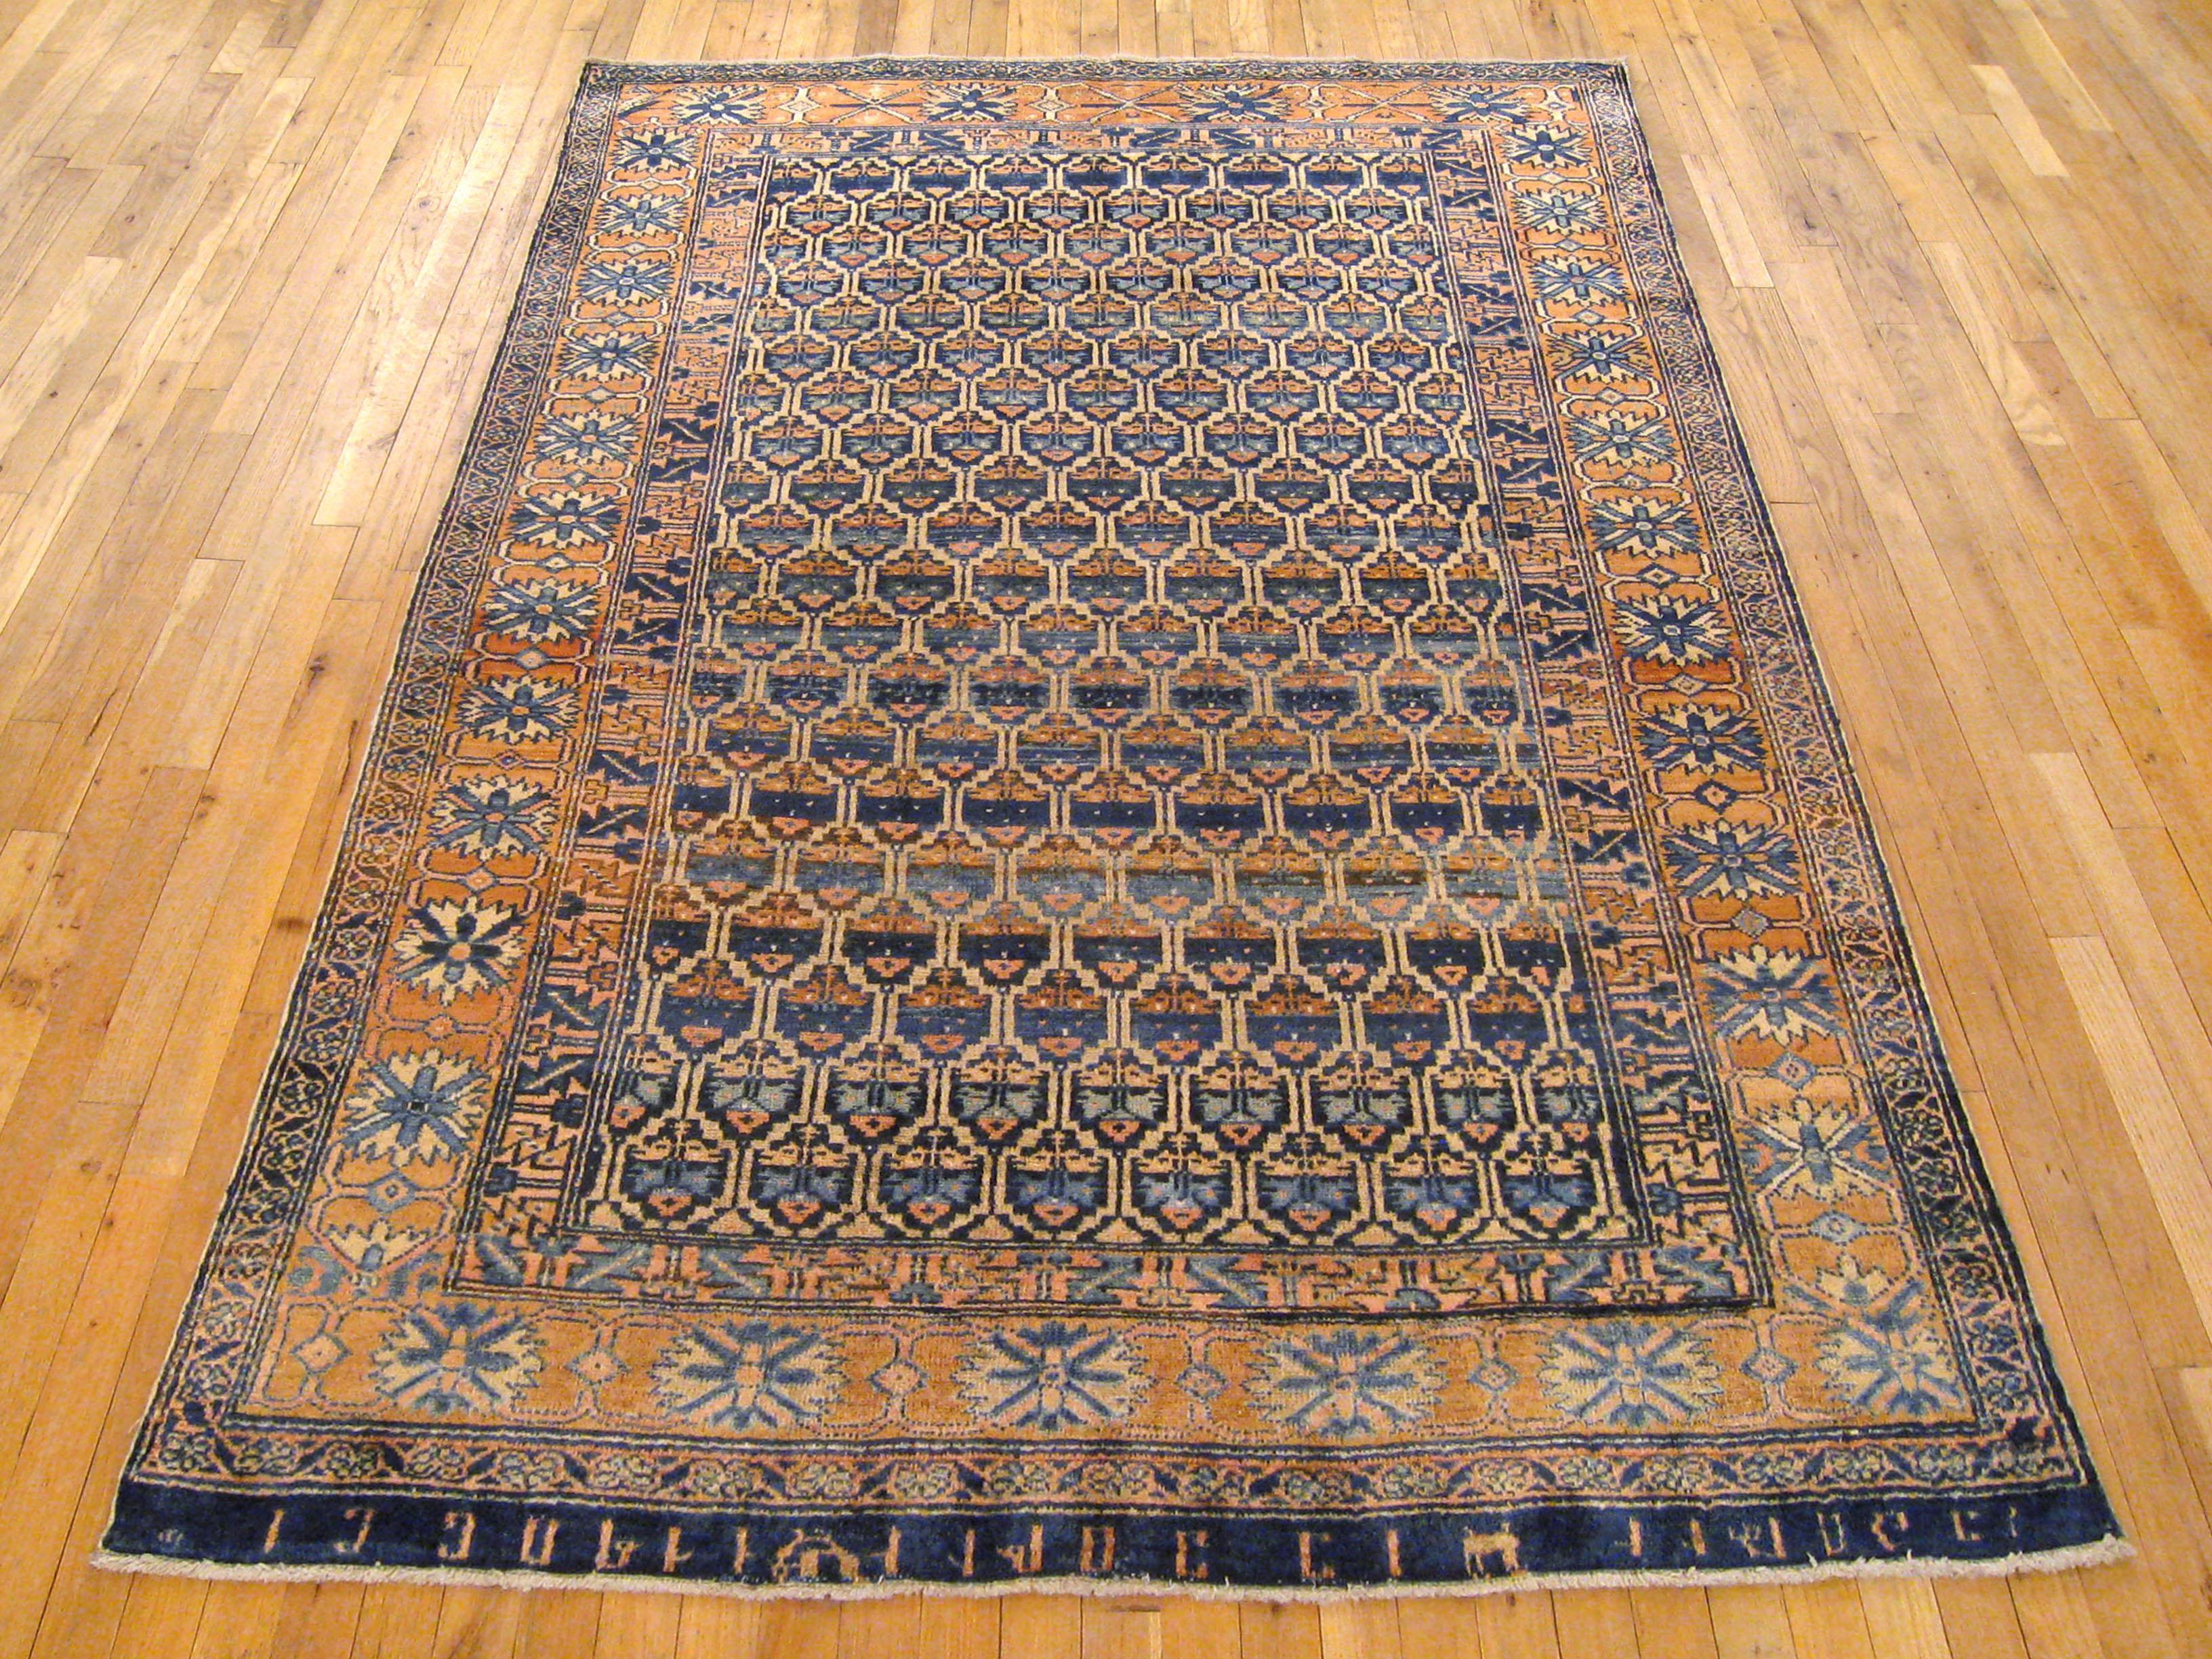 Antique Persian Malayer oriental rug in room size

An antique Persian Malayer oriental rug, circa 1920. Size 6'9